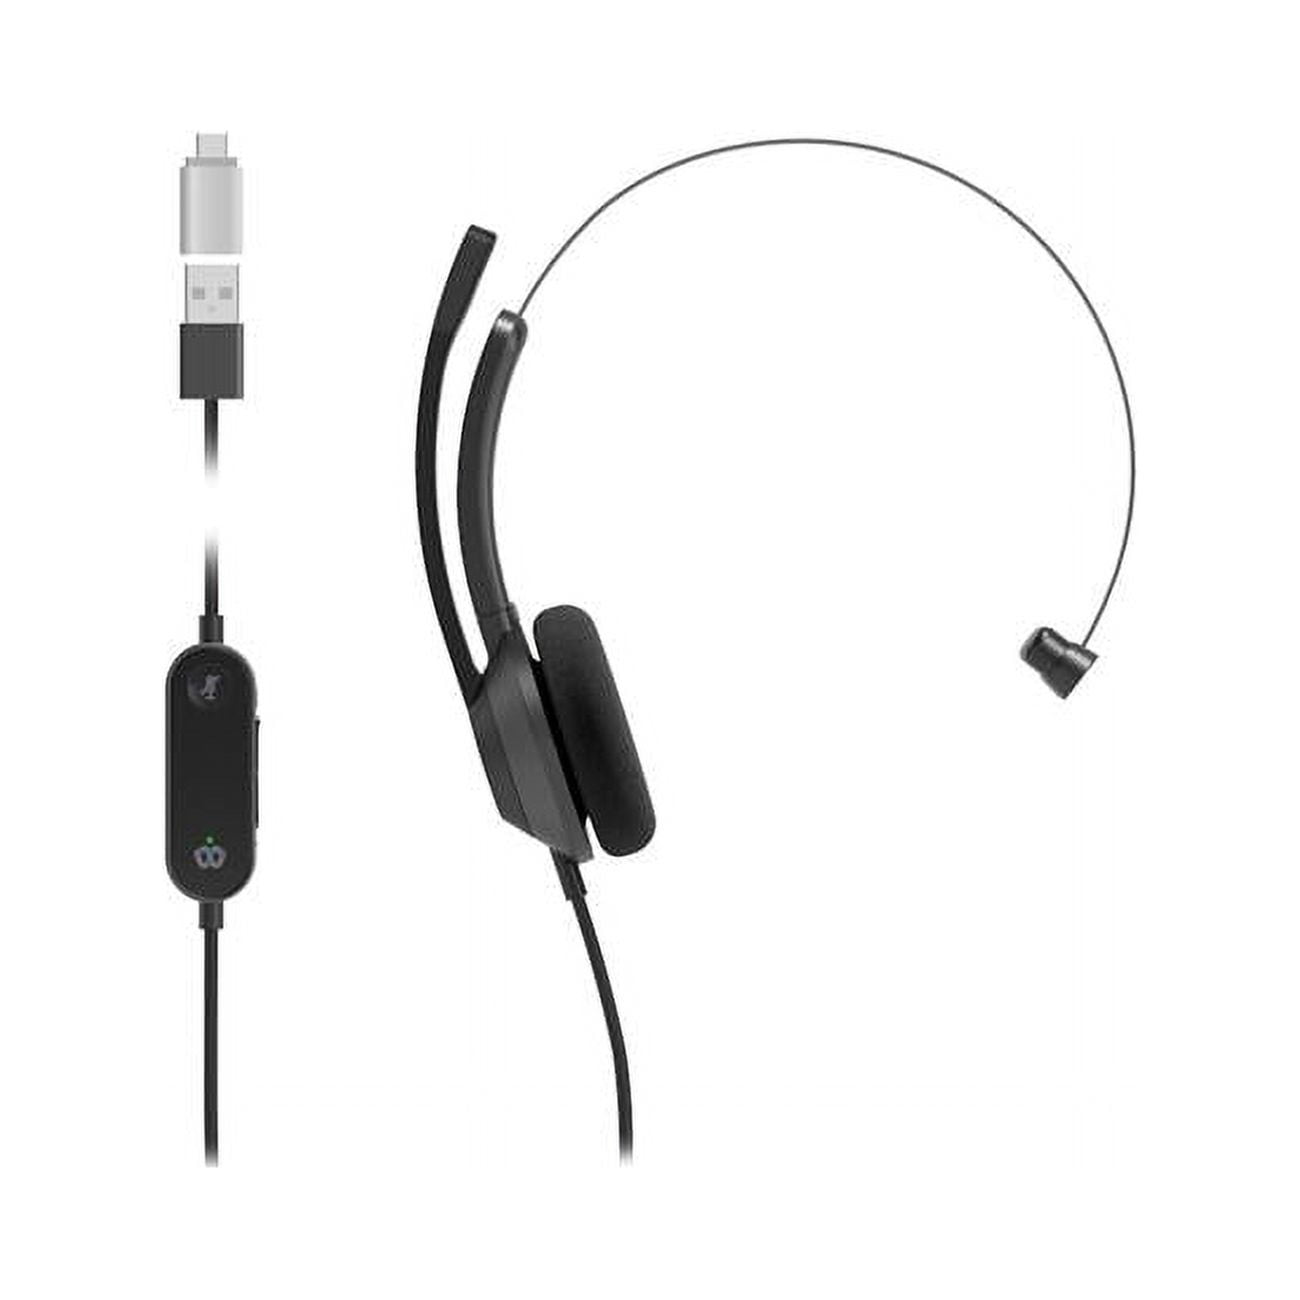 Picture of Cisco HS-W-321-C-USBC 321 Wired Single On-Ear Headset, Black